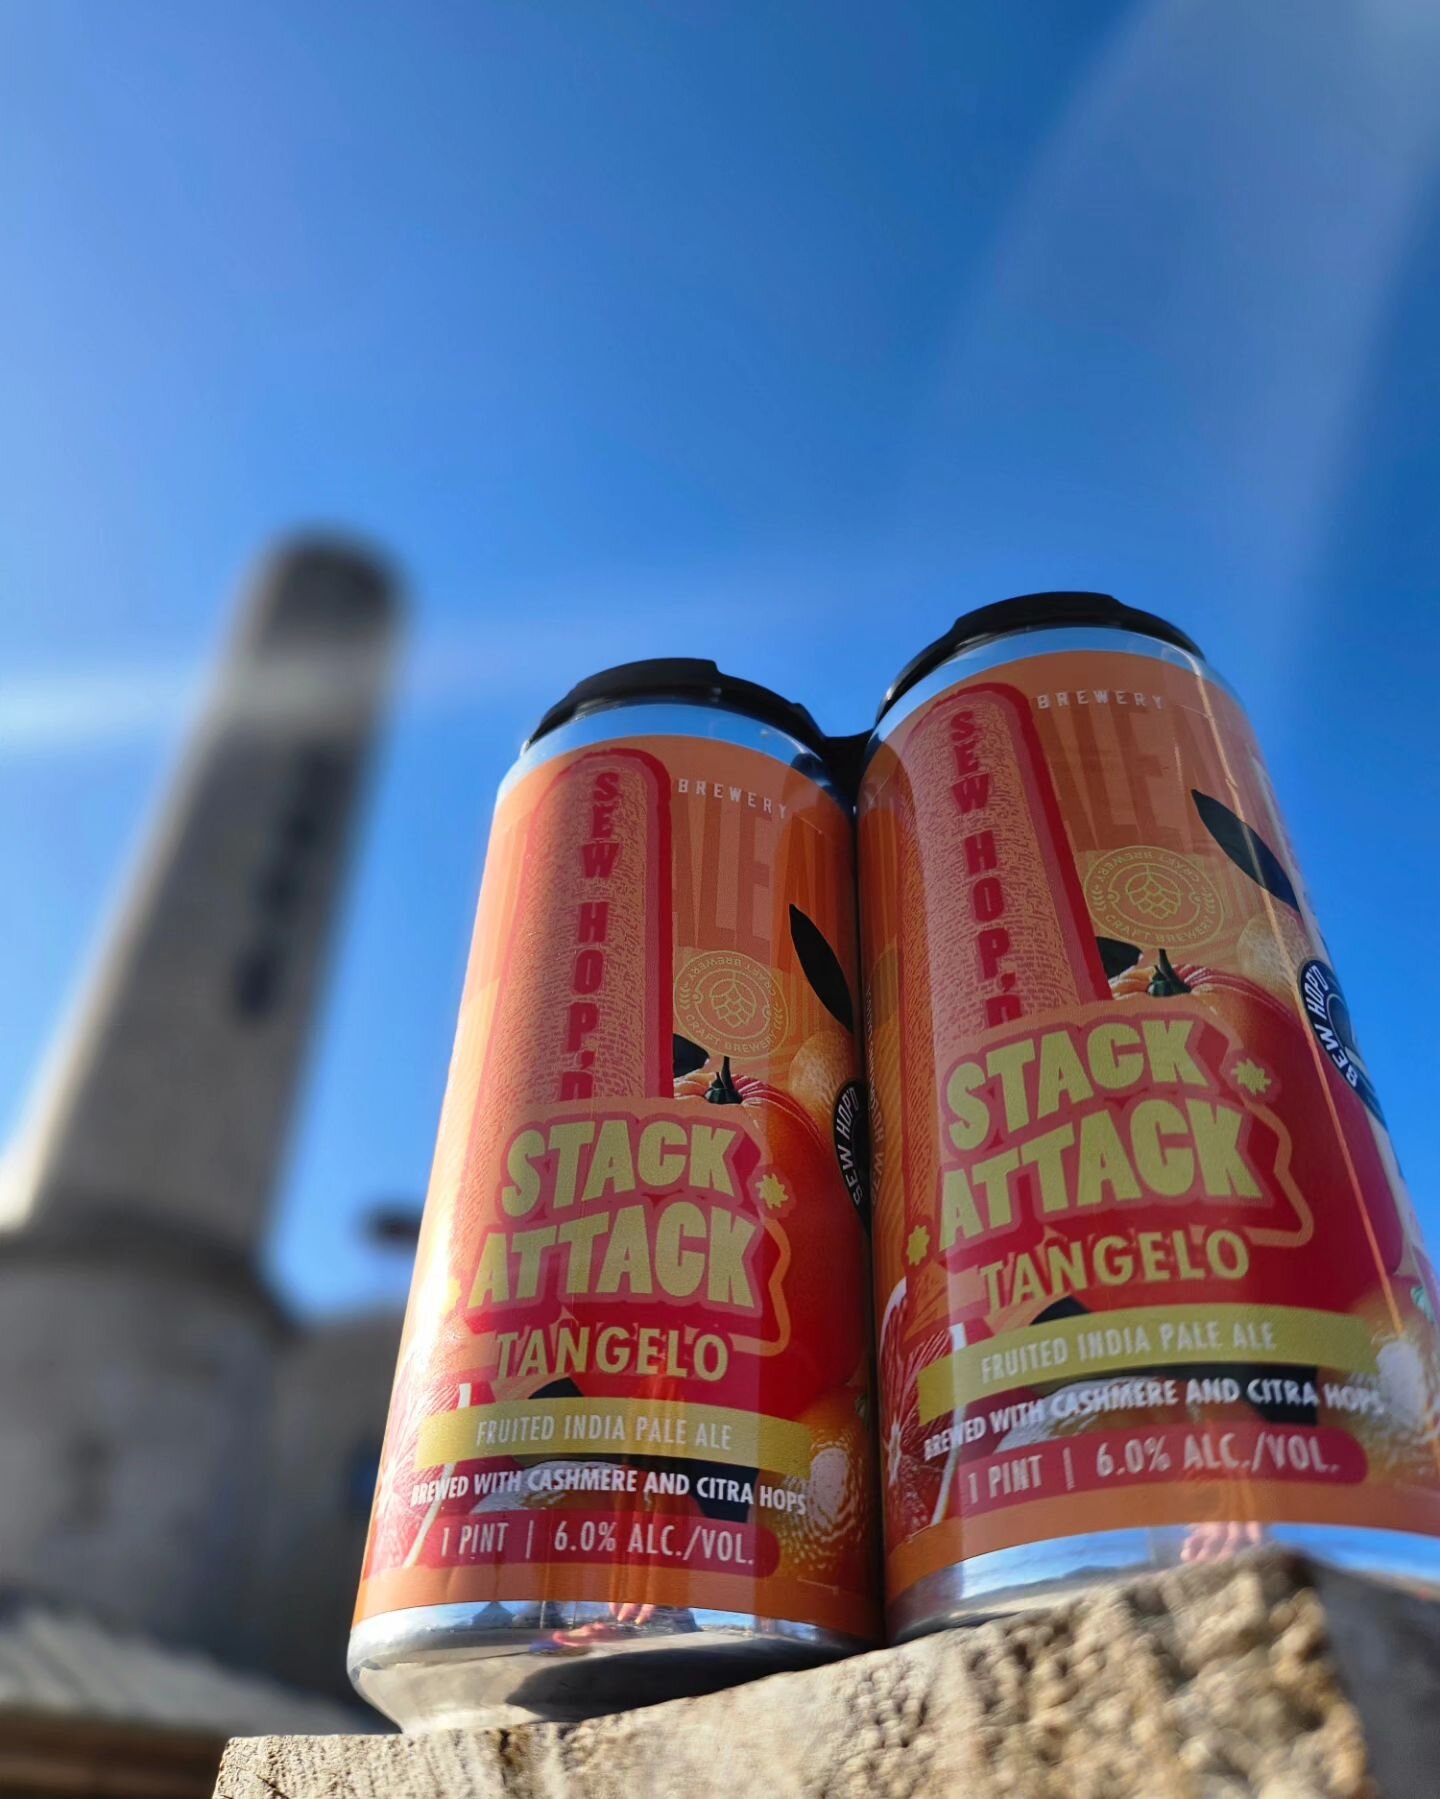 🚨🍊 New Beer Alert 🍊🚨
Stack Attack Tangelo Fruited IPA 

This beer is a masterpiece - from freshly milled grain to selected hops and tangelo fruit puree. From boil to dry hop - this bad boy has nearly 25lbs of selected hops. You'll enjoy tangelo a